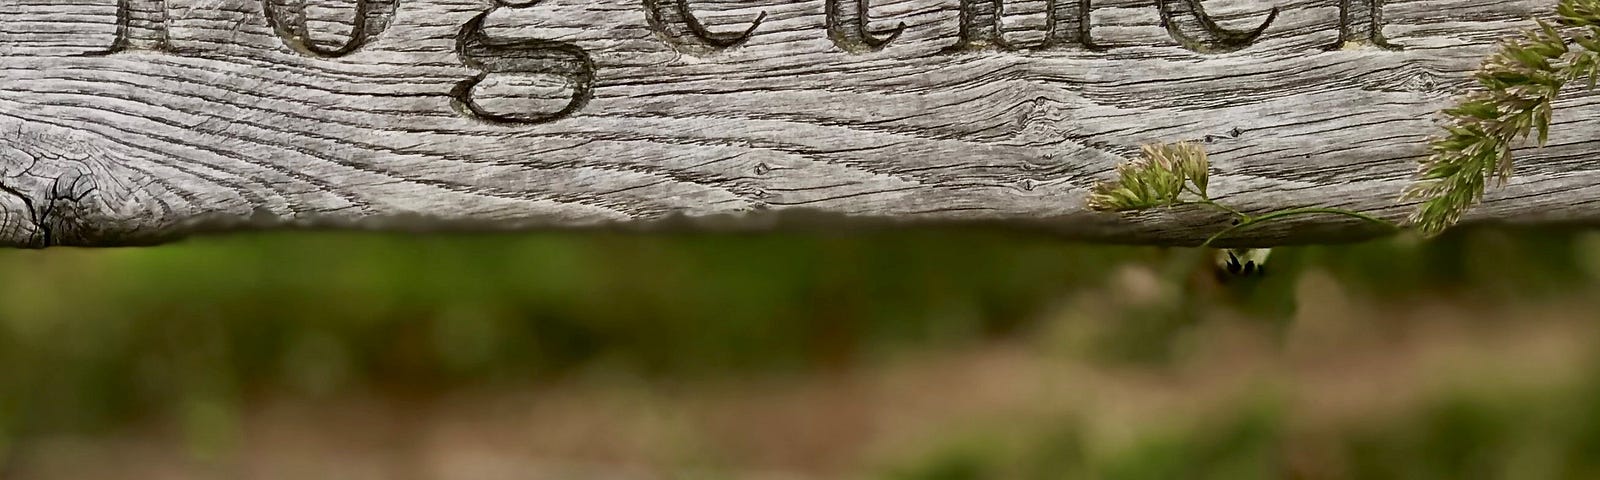 A wooden fence in front of a field with the word “together” etched into the surface.